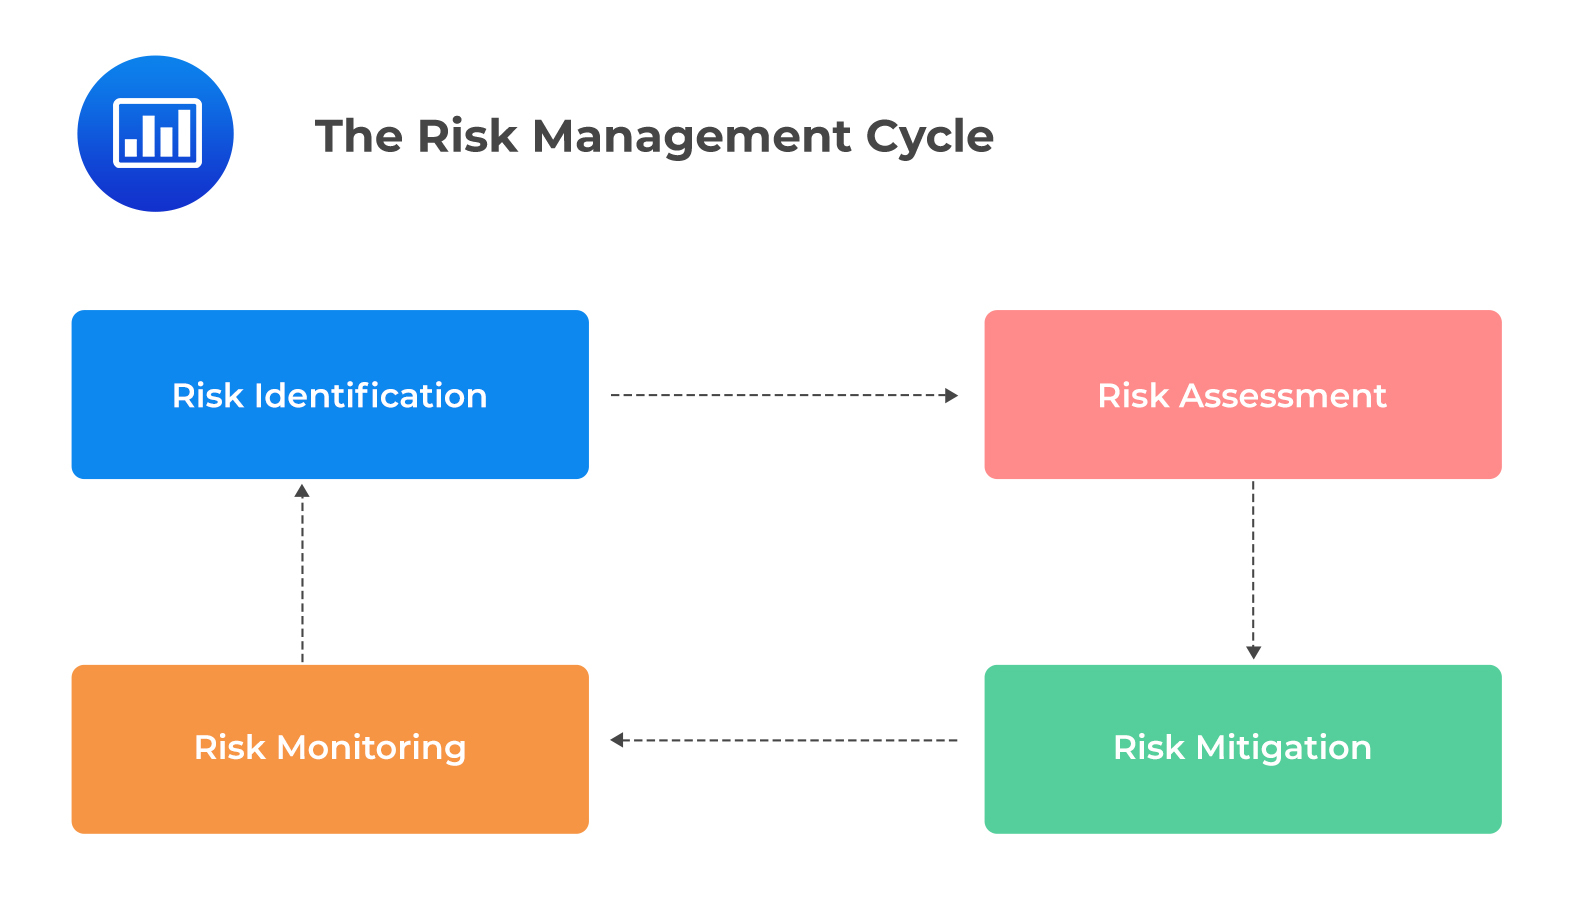 Risk Management in Banking: Types + Best Practices for Mitigation